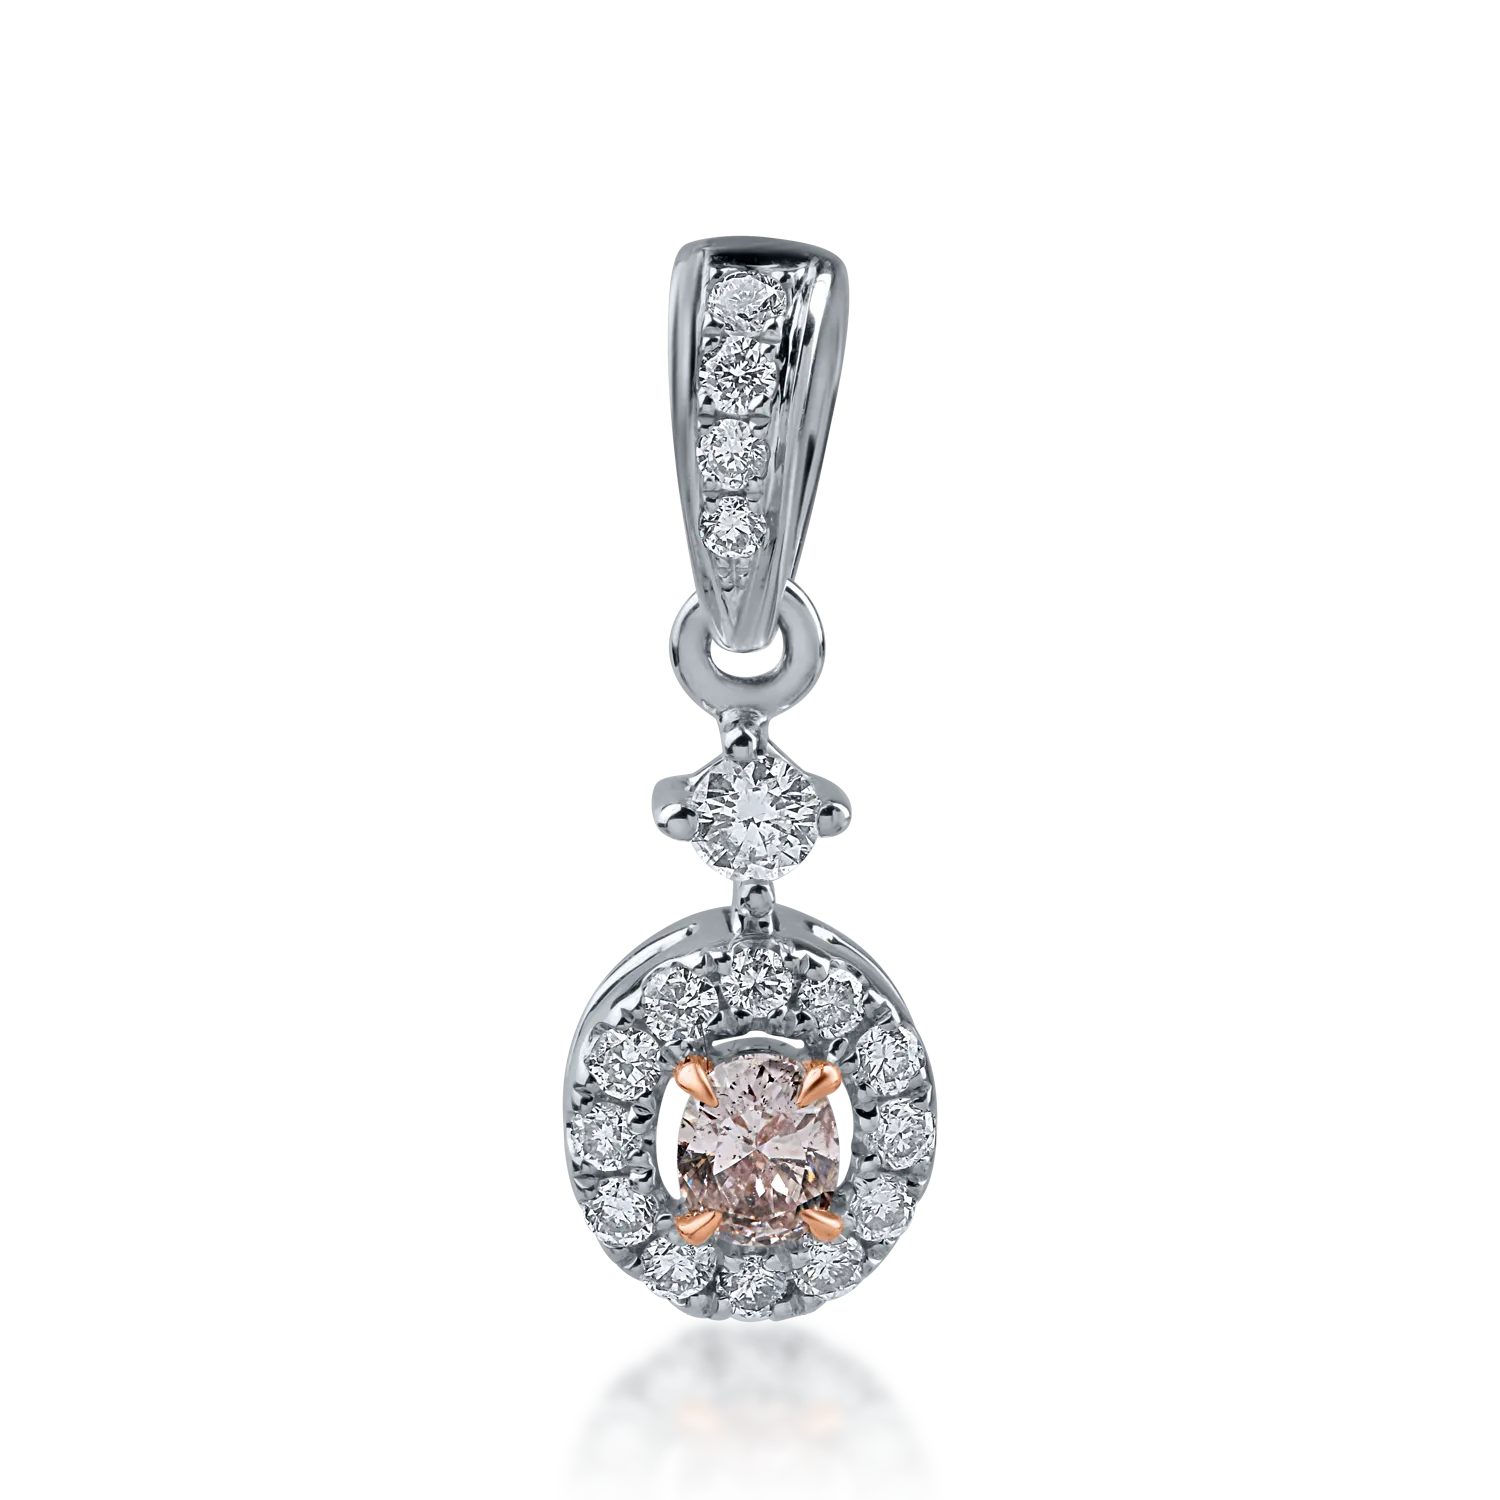 White gold pendant with 0.076ct fancy-pink diamond and 0.144ct diamonds